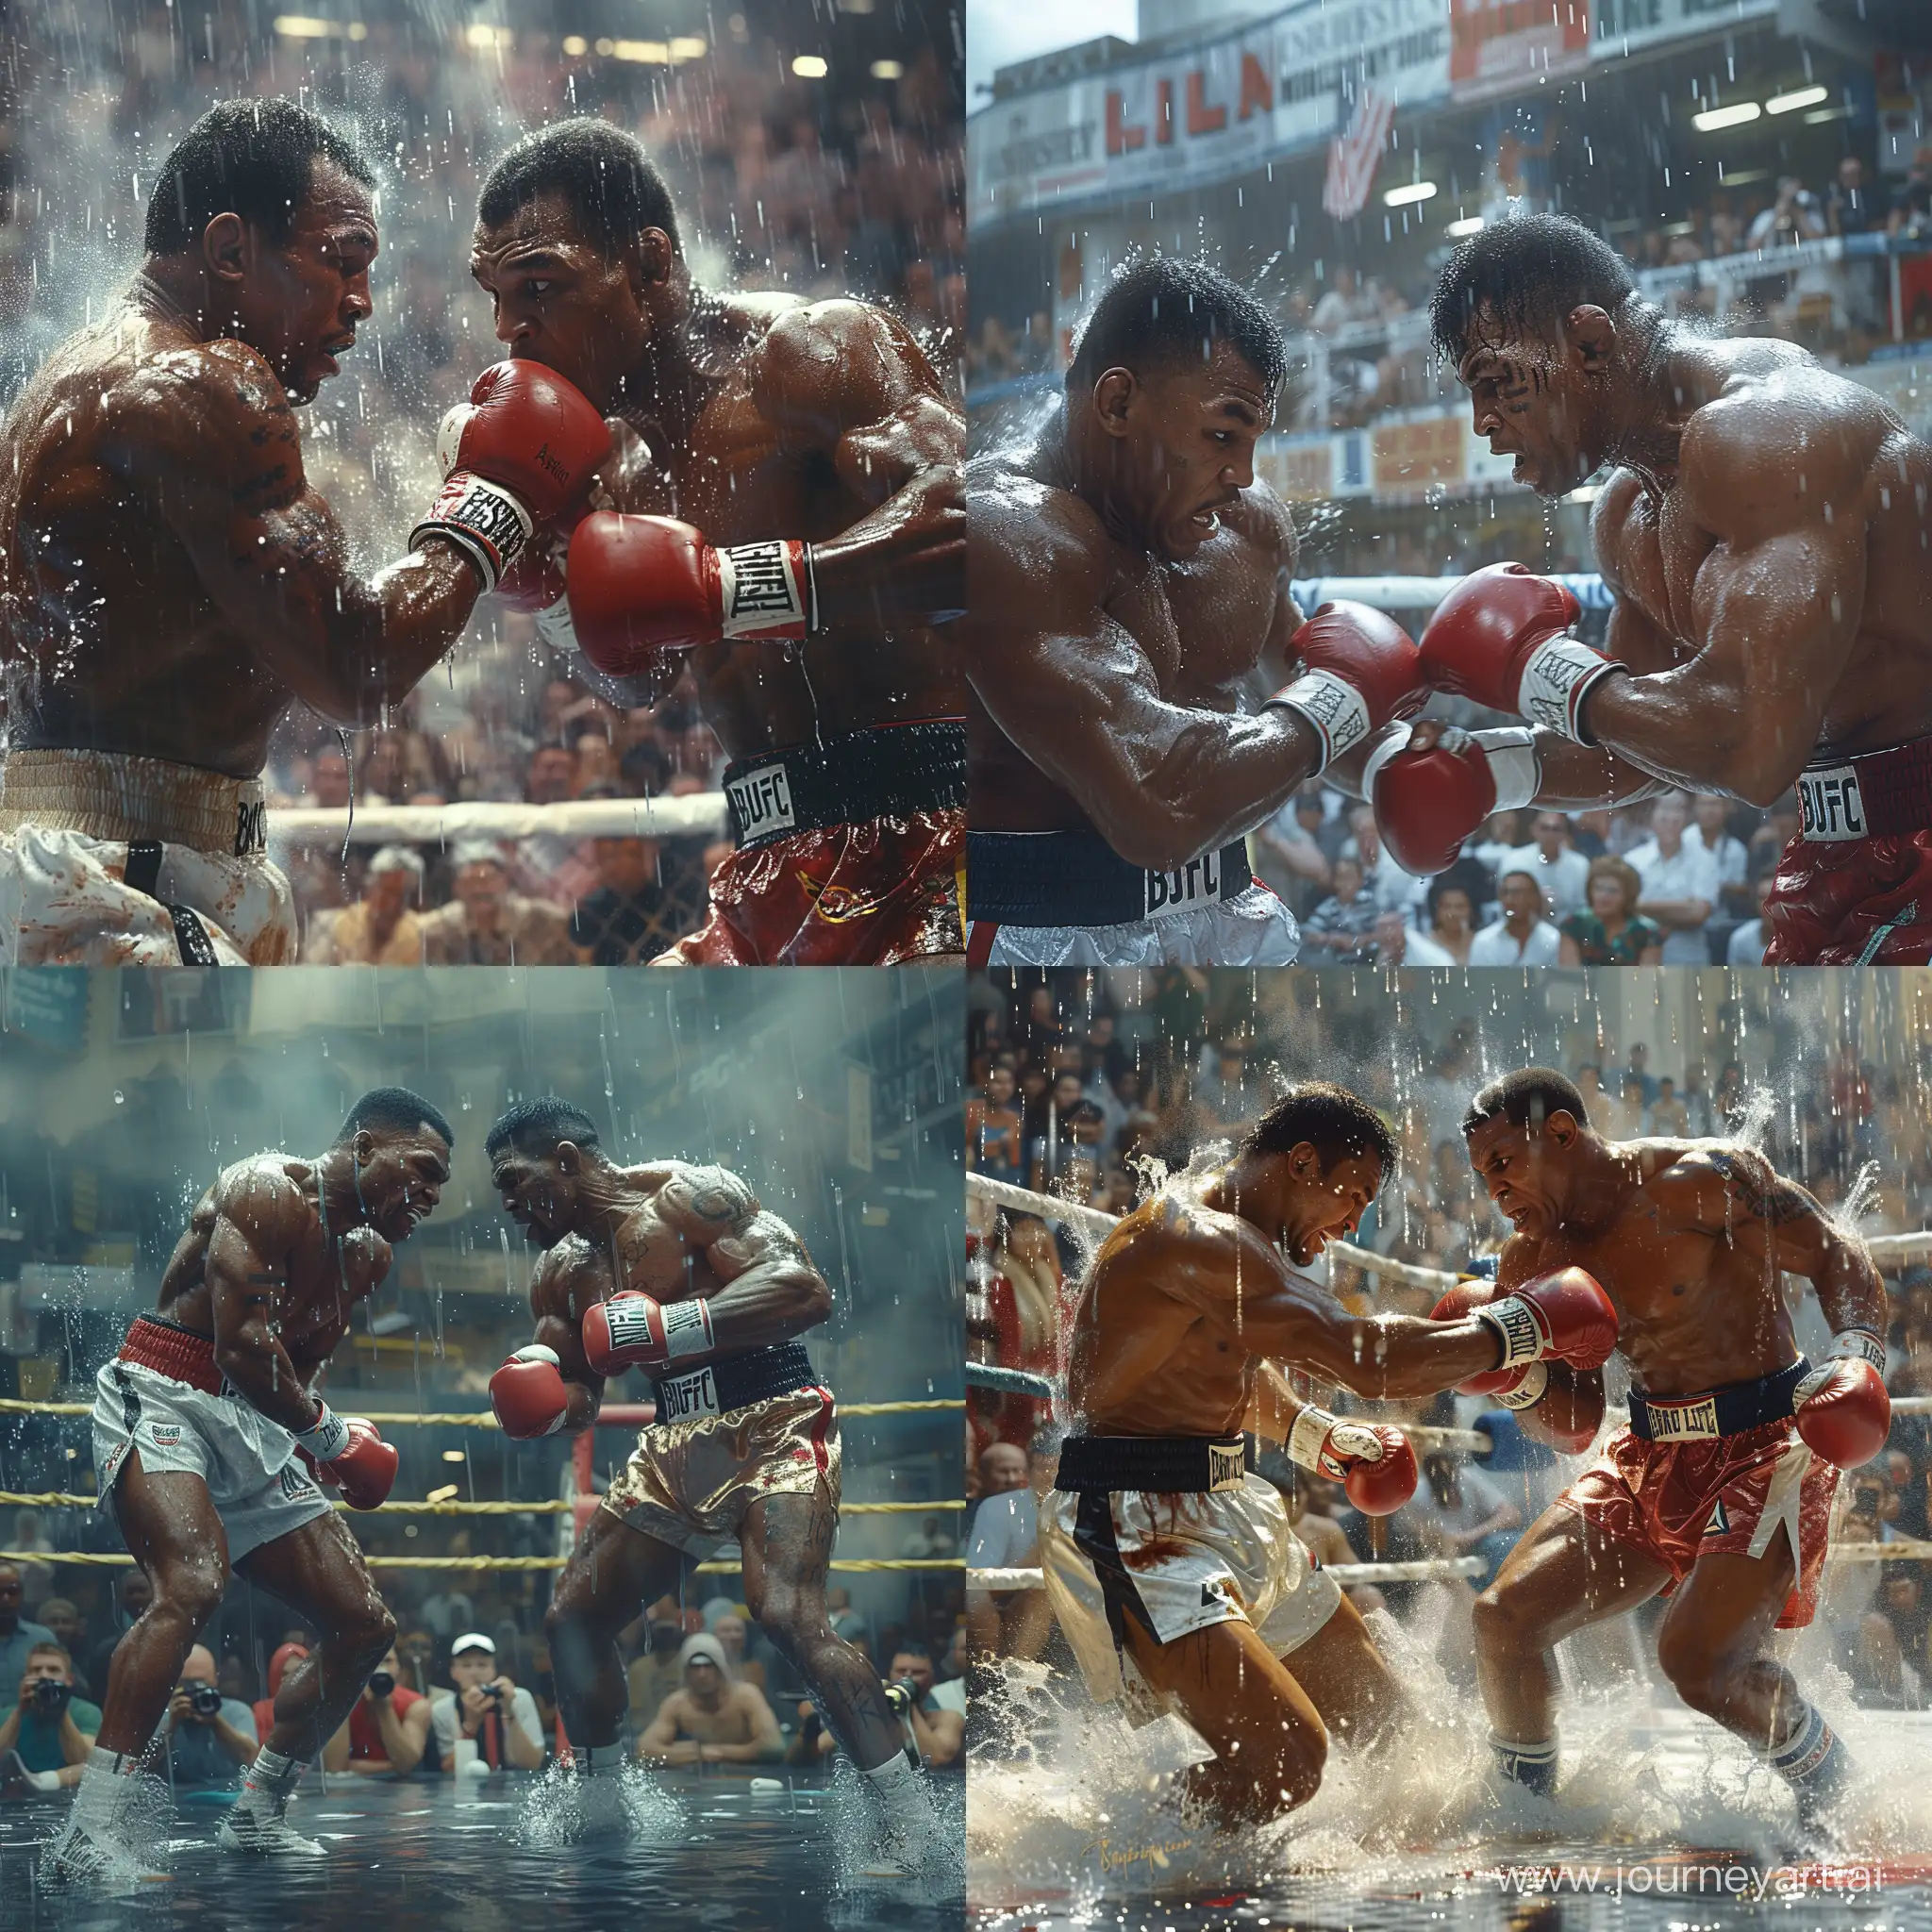 Legendary-Boxers-Mohamed-Ali-and-Mike-Tyson-Battle-in-Rainy-MMA-Match